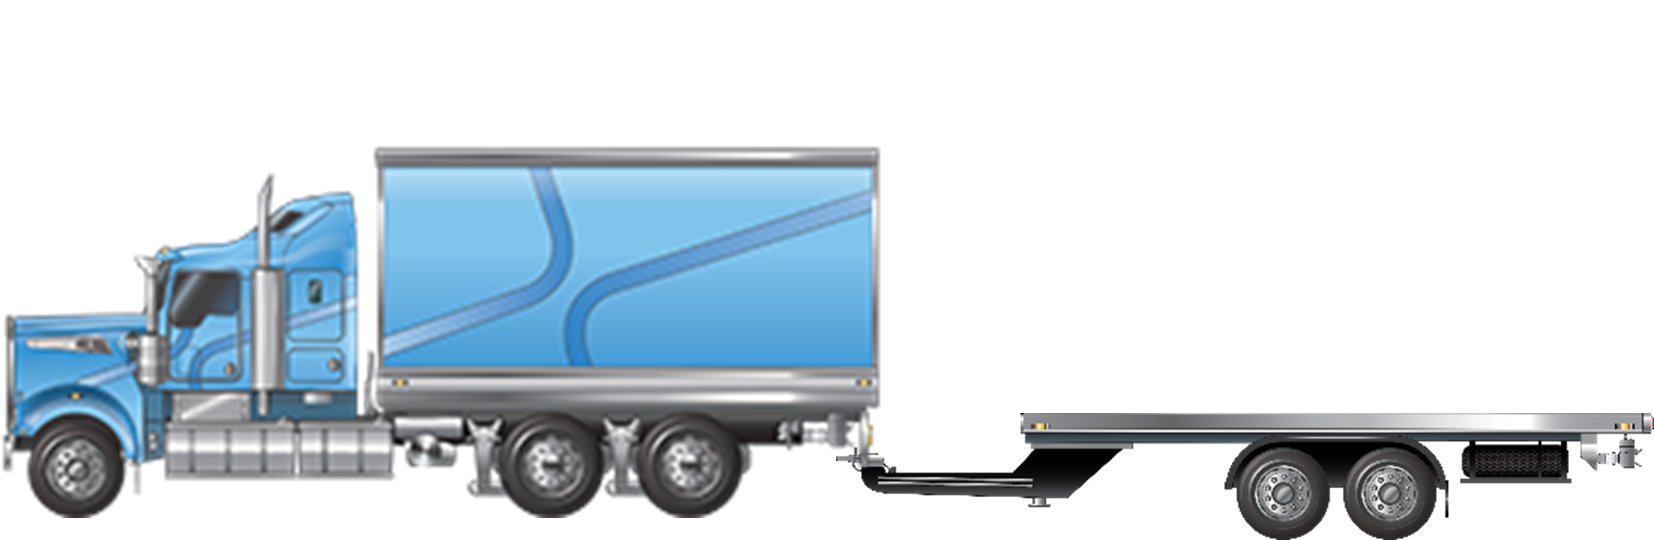 Example of a class 3 rigid truck towing a pig trailer